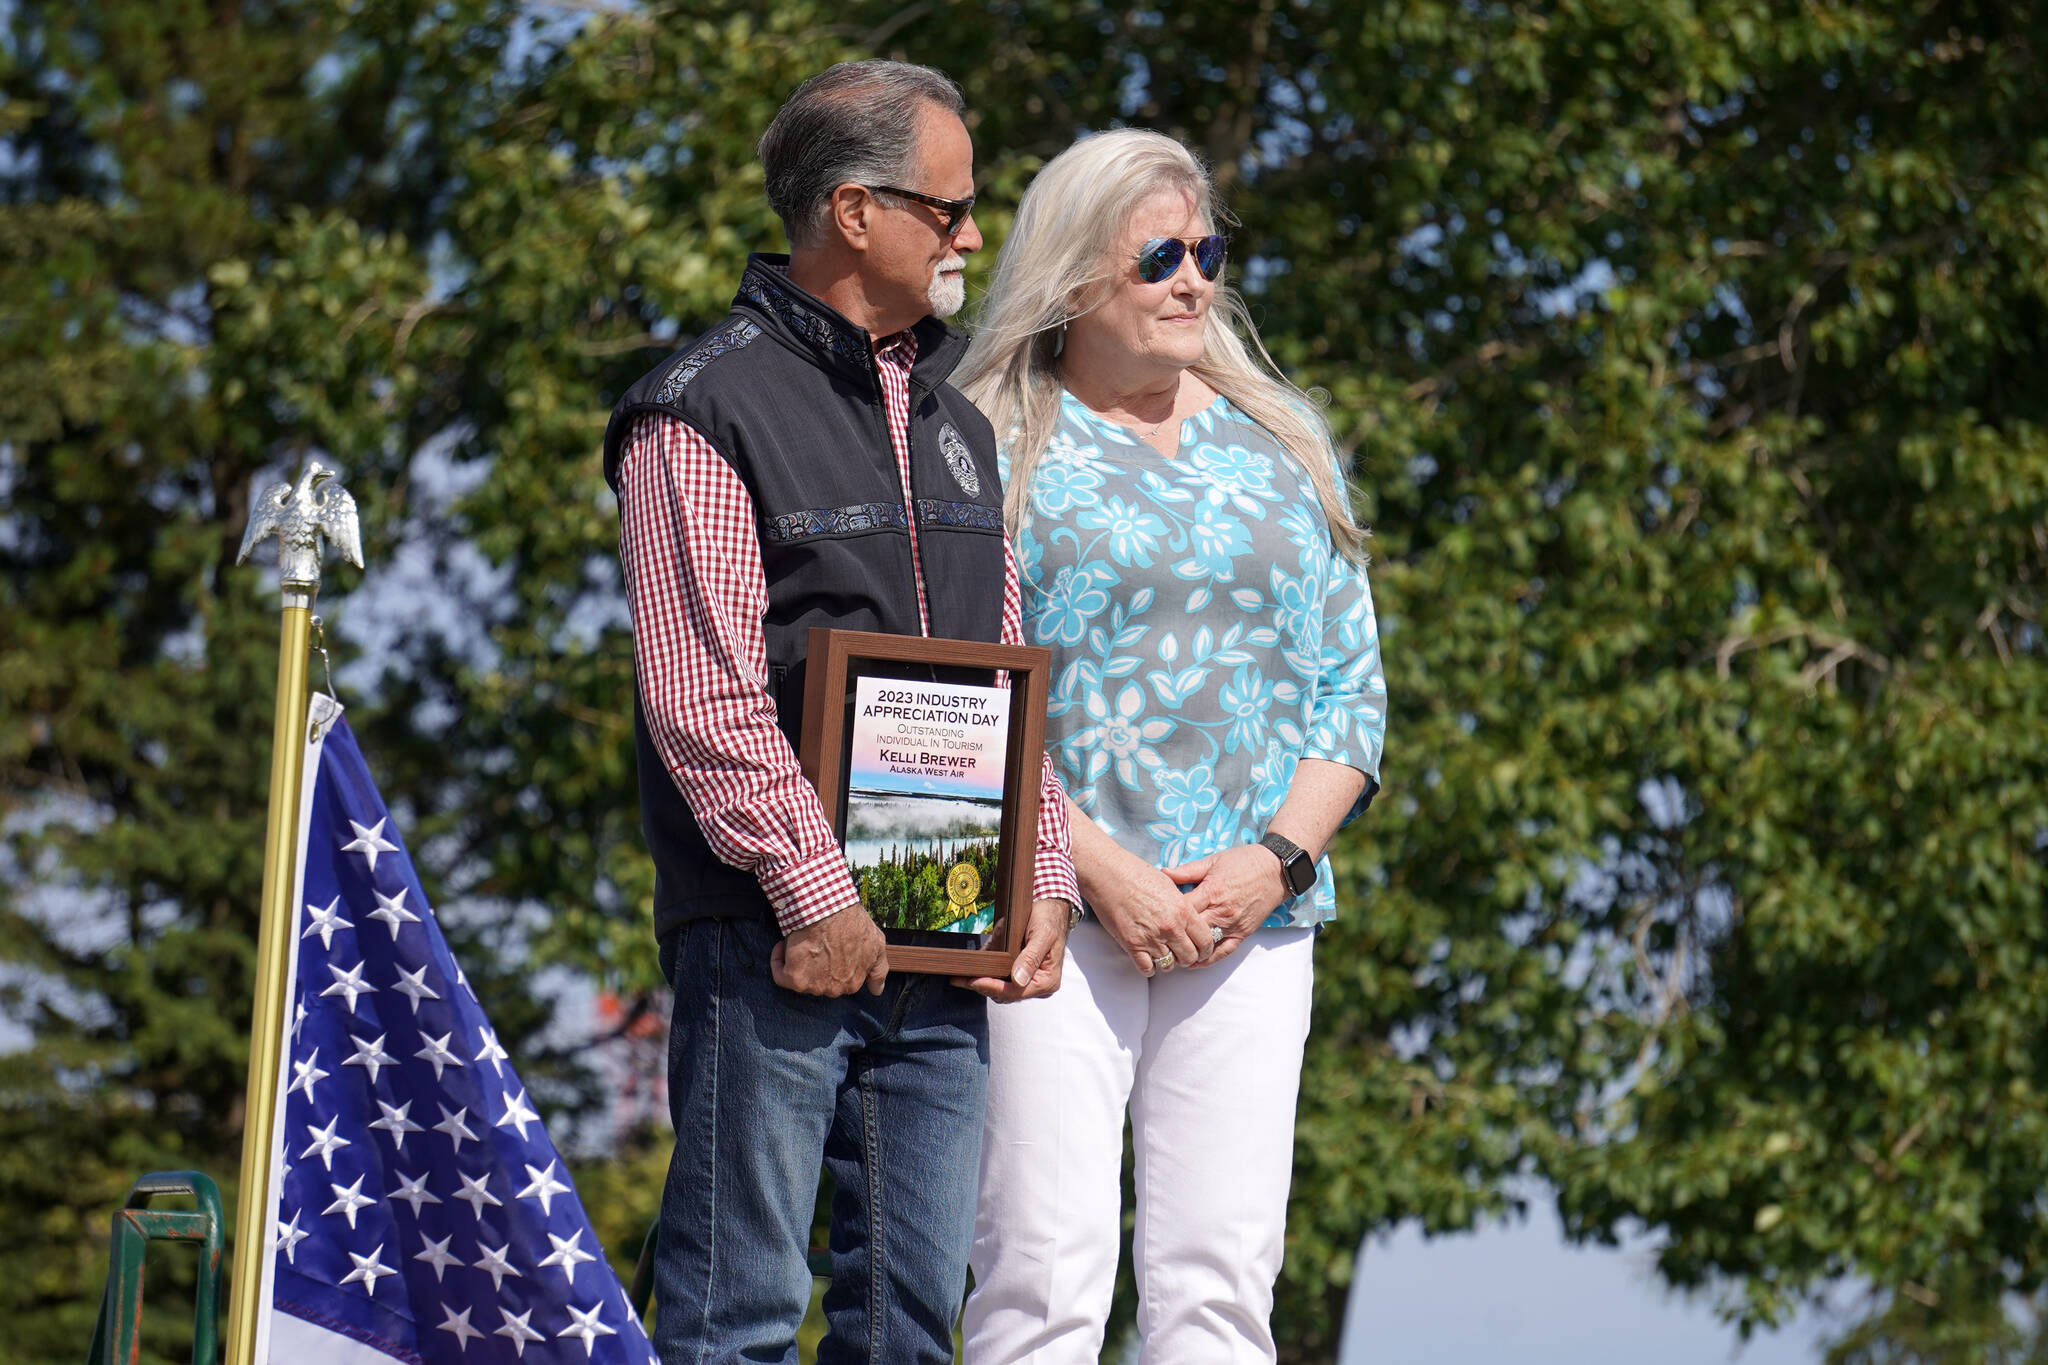 Kelli Brewer, right, receives the Outstanding Individual in Tourism Award from Kenai Peninsula Borough Mayor Peter Micciche during Industry Appreciation Day festivities at the Kenai softball greenstrip on Saturday, Aug. 19, 2023. (Jake Dye/Peninsula Clarion)